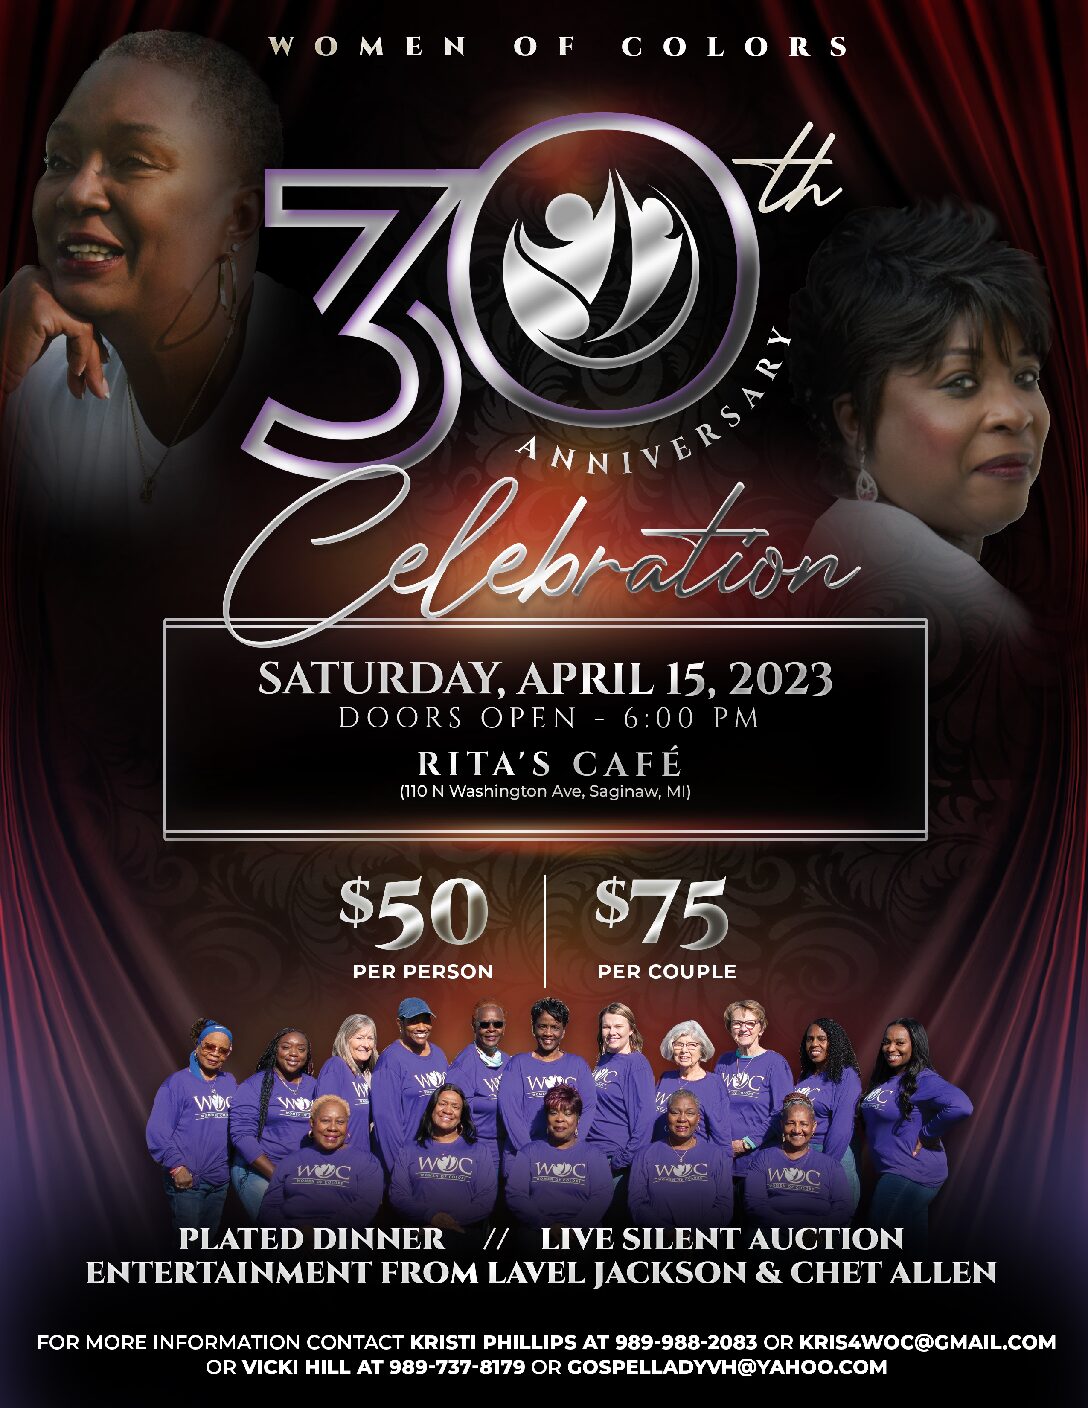 <h1 class="tribe-events-single-event-title">Women of Colors 30th Anniversary Celebration</h1>